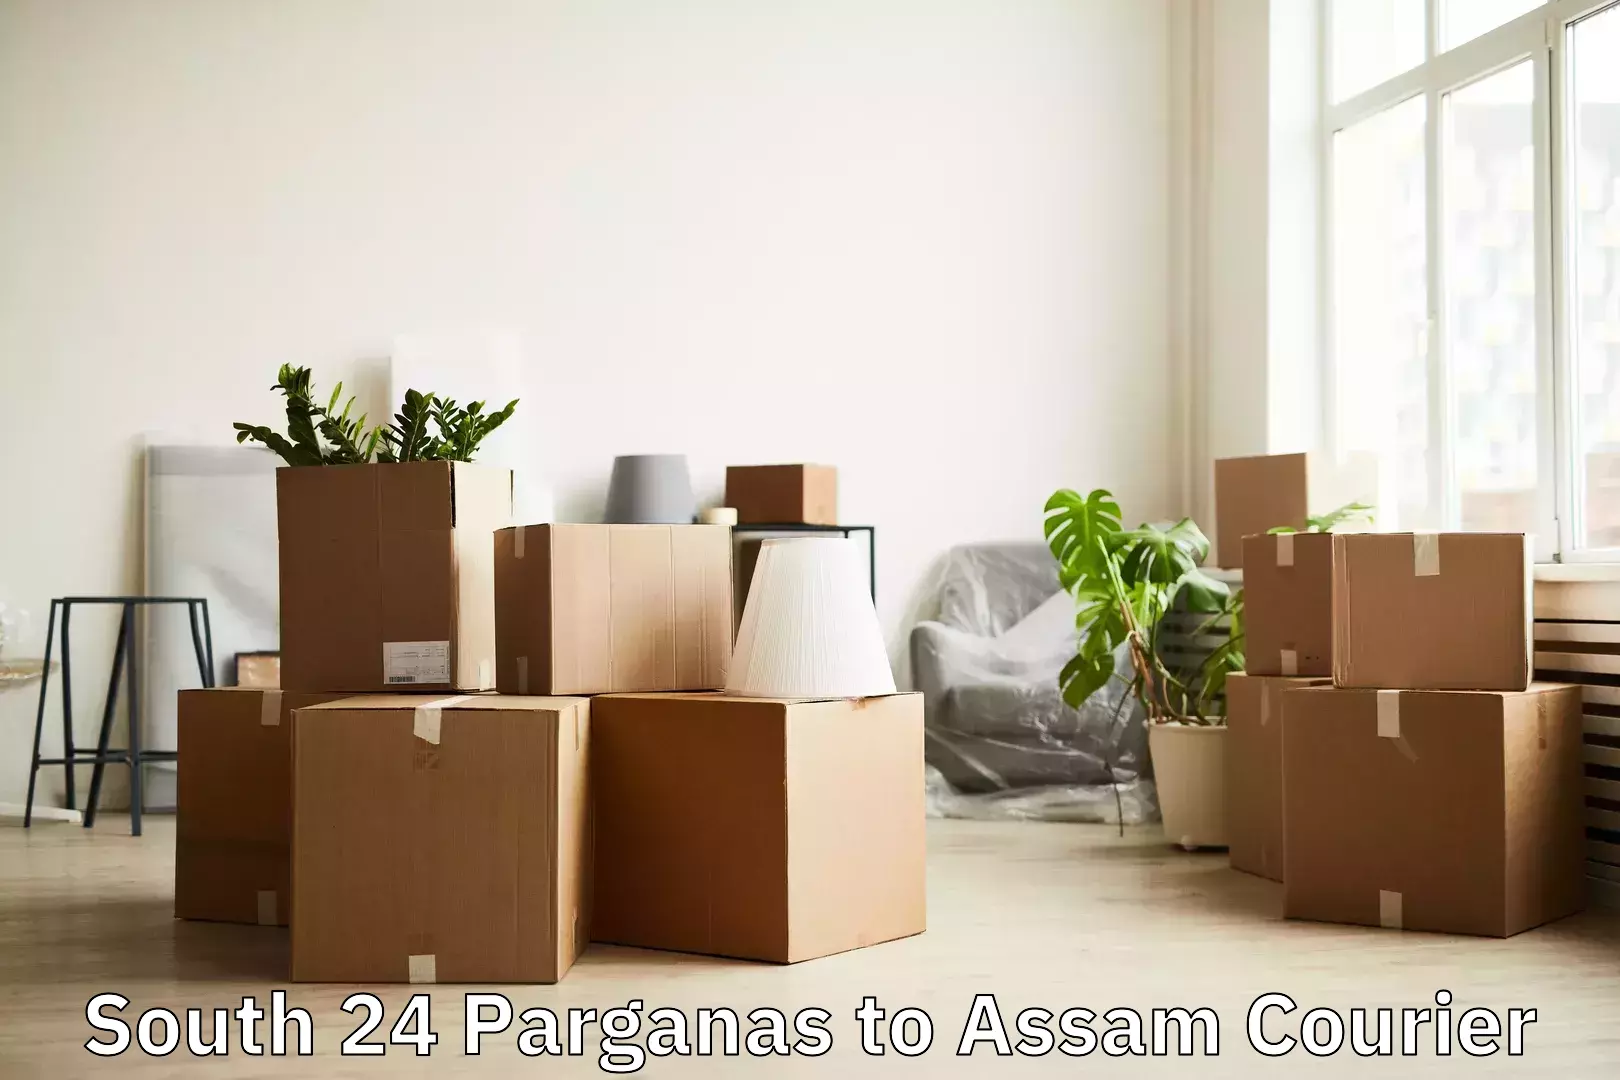 Online luggage shipping booking in South 24 Parganas to Guwahati